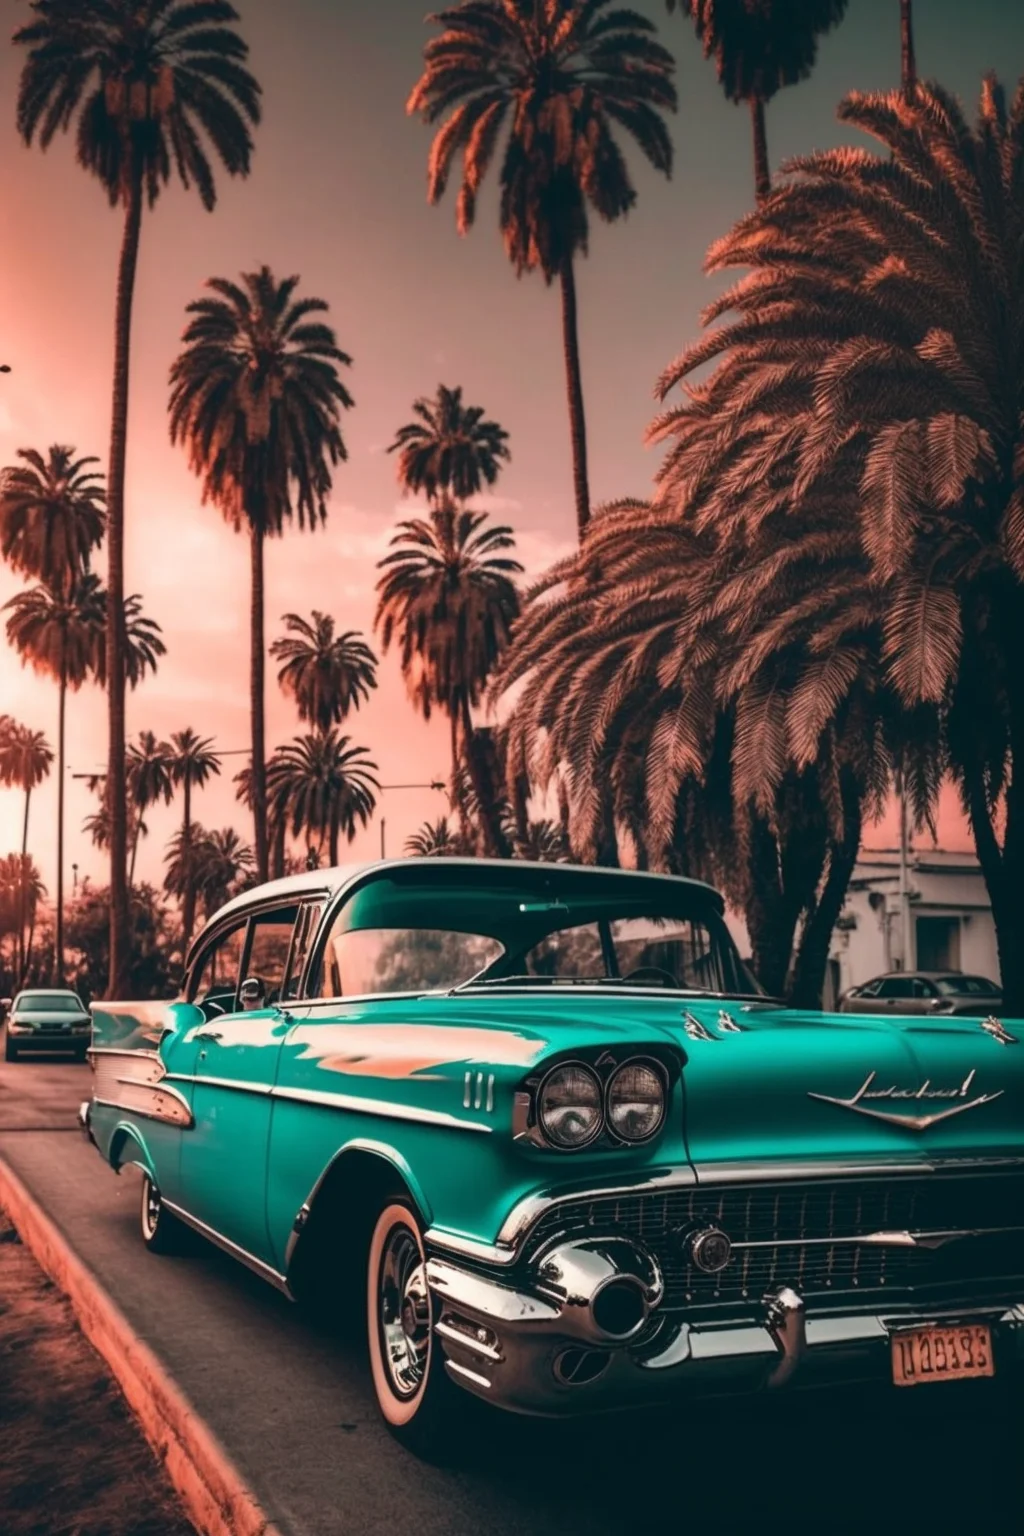 Aesthetic Vintage Car Wallpaper for iPhone 2023 It Before Me